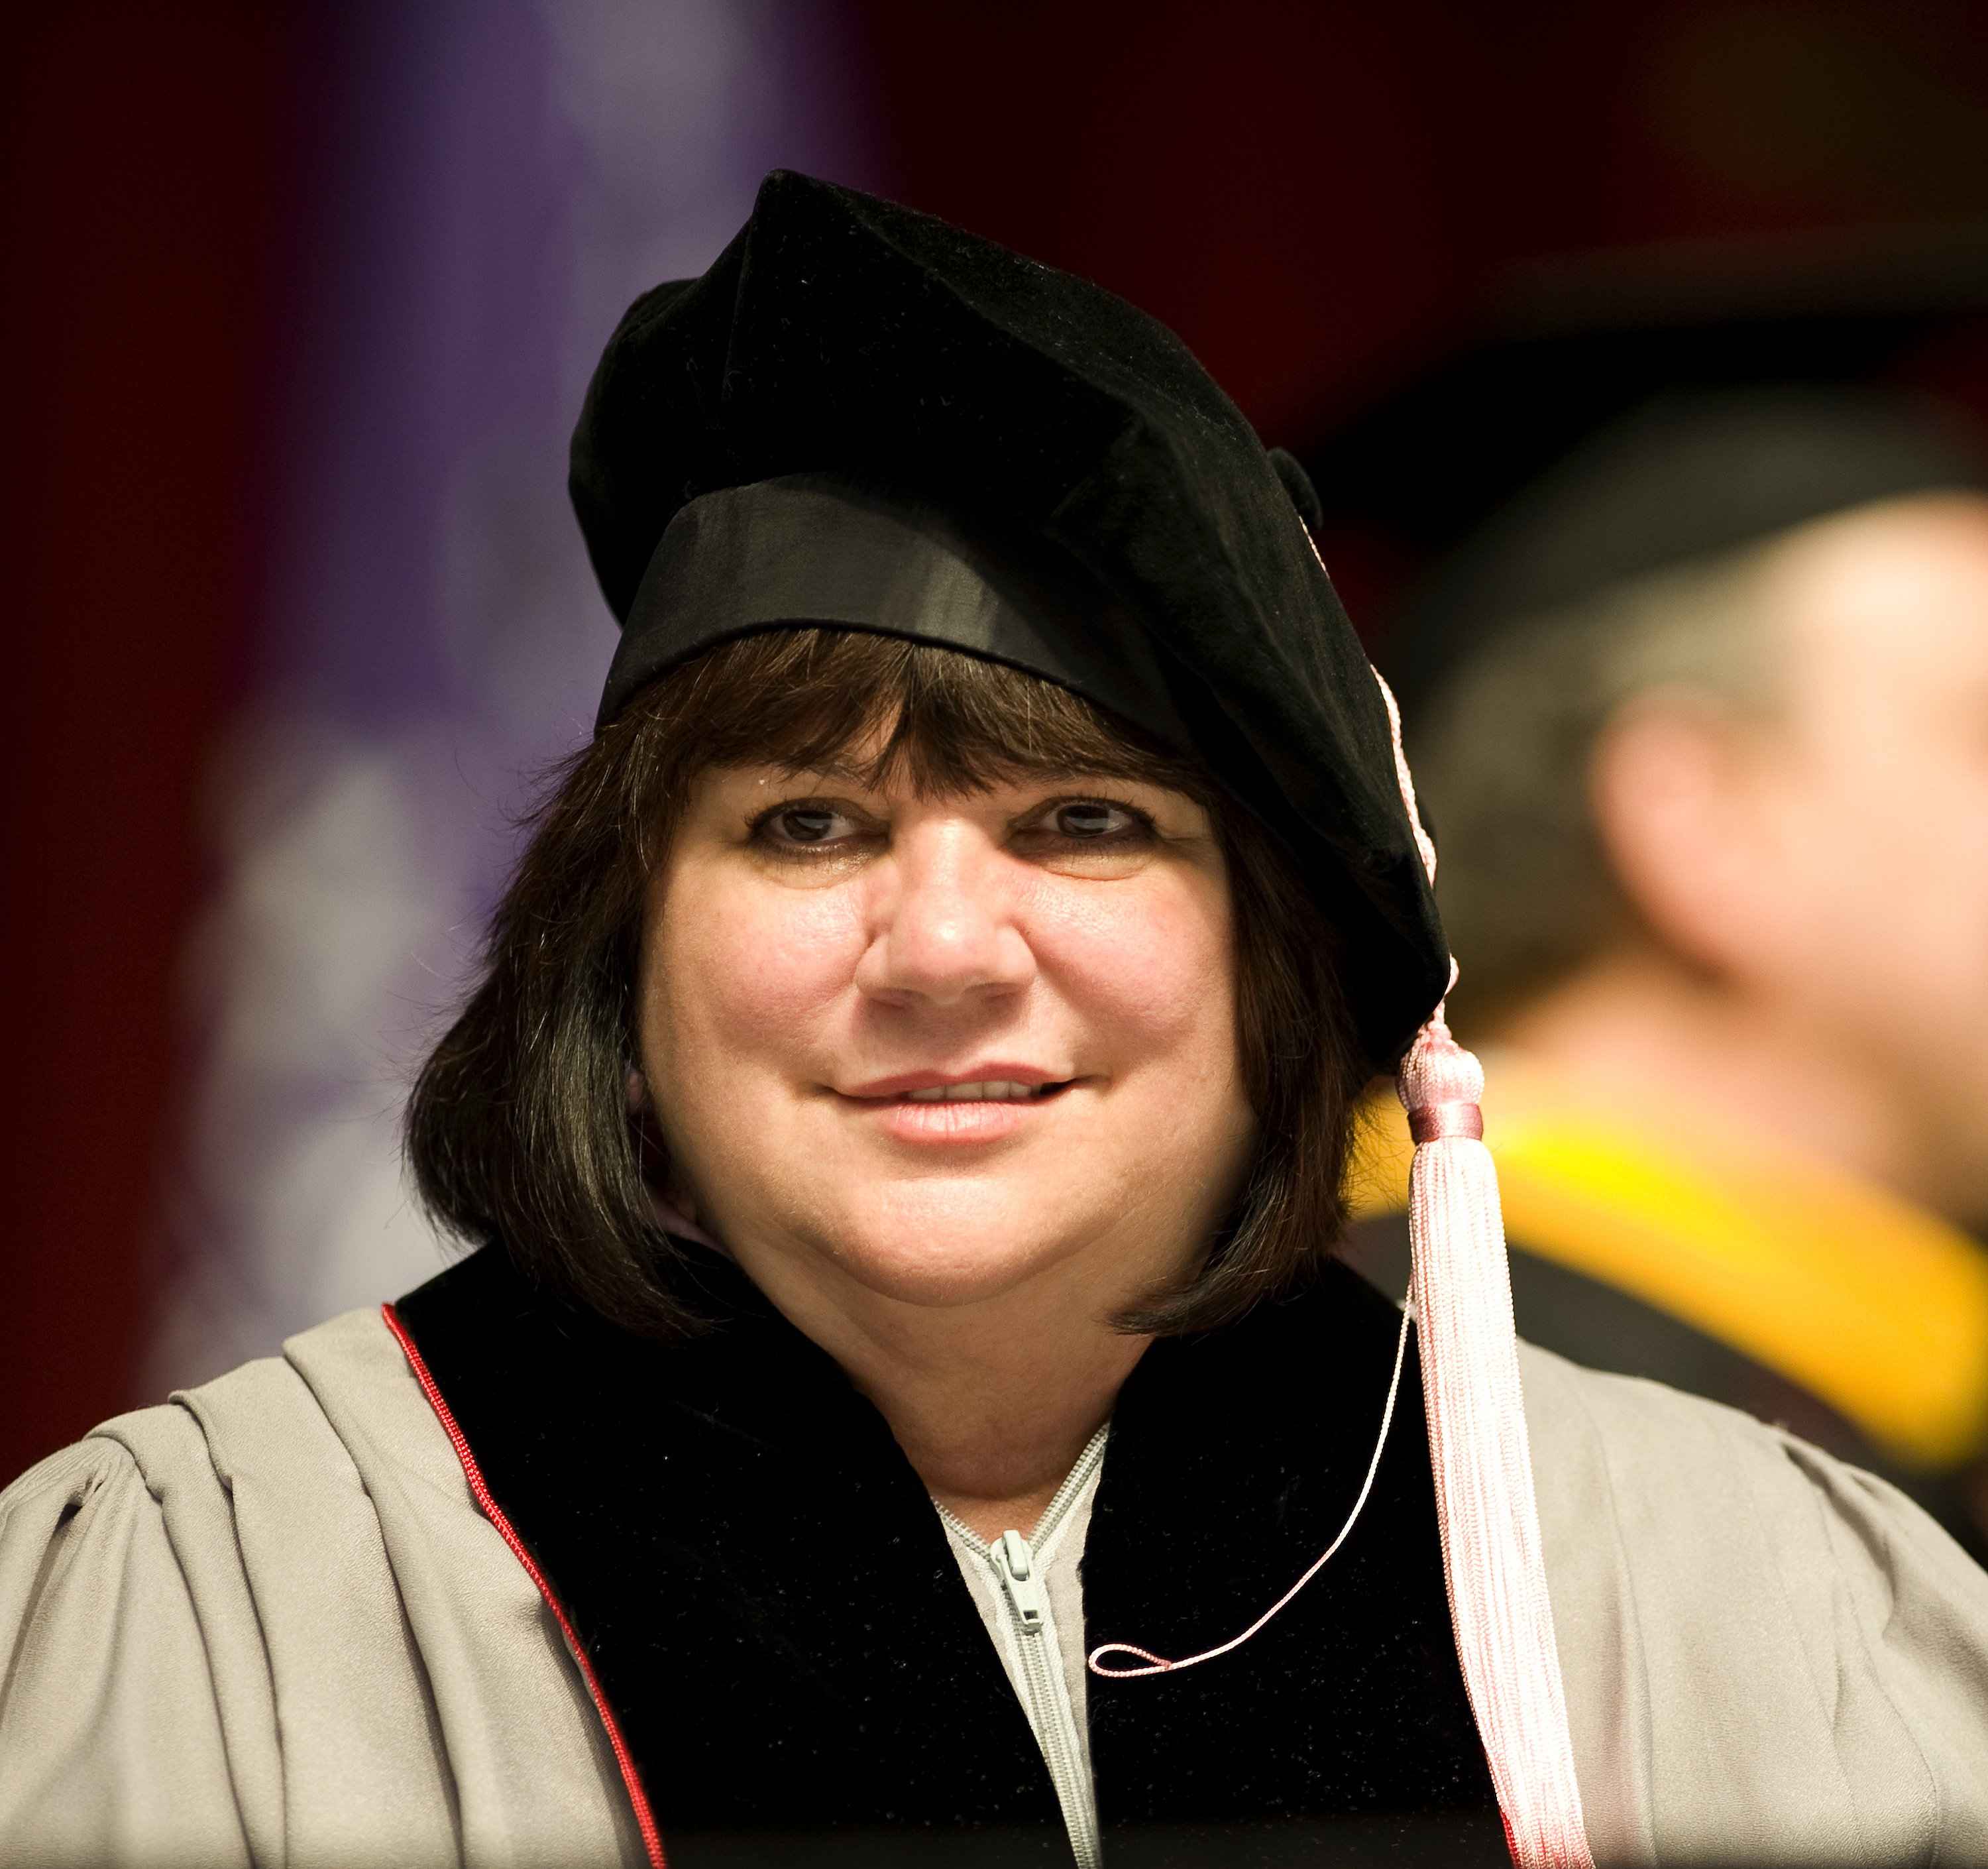 Singer Linda Ronstadt receives an honorary doctorate of music from Berklee College of Music president Roger Brown in Boston, Massachusetts on May 9, 2009. | Source: Getty Images